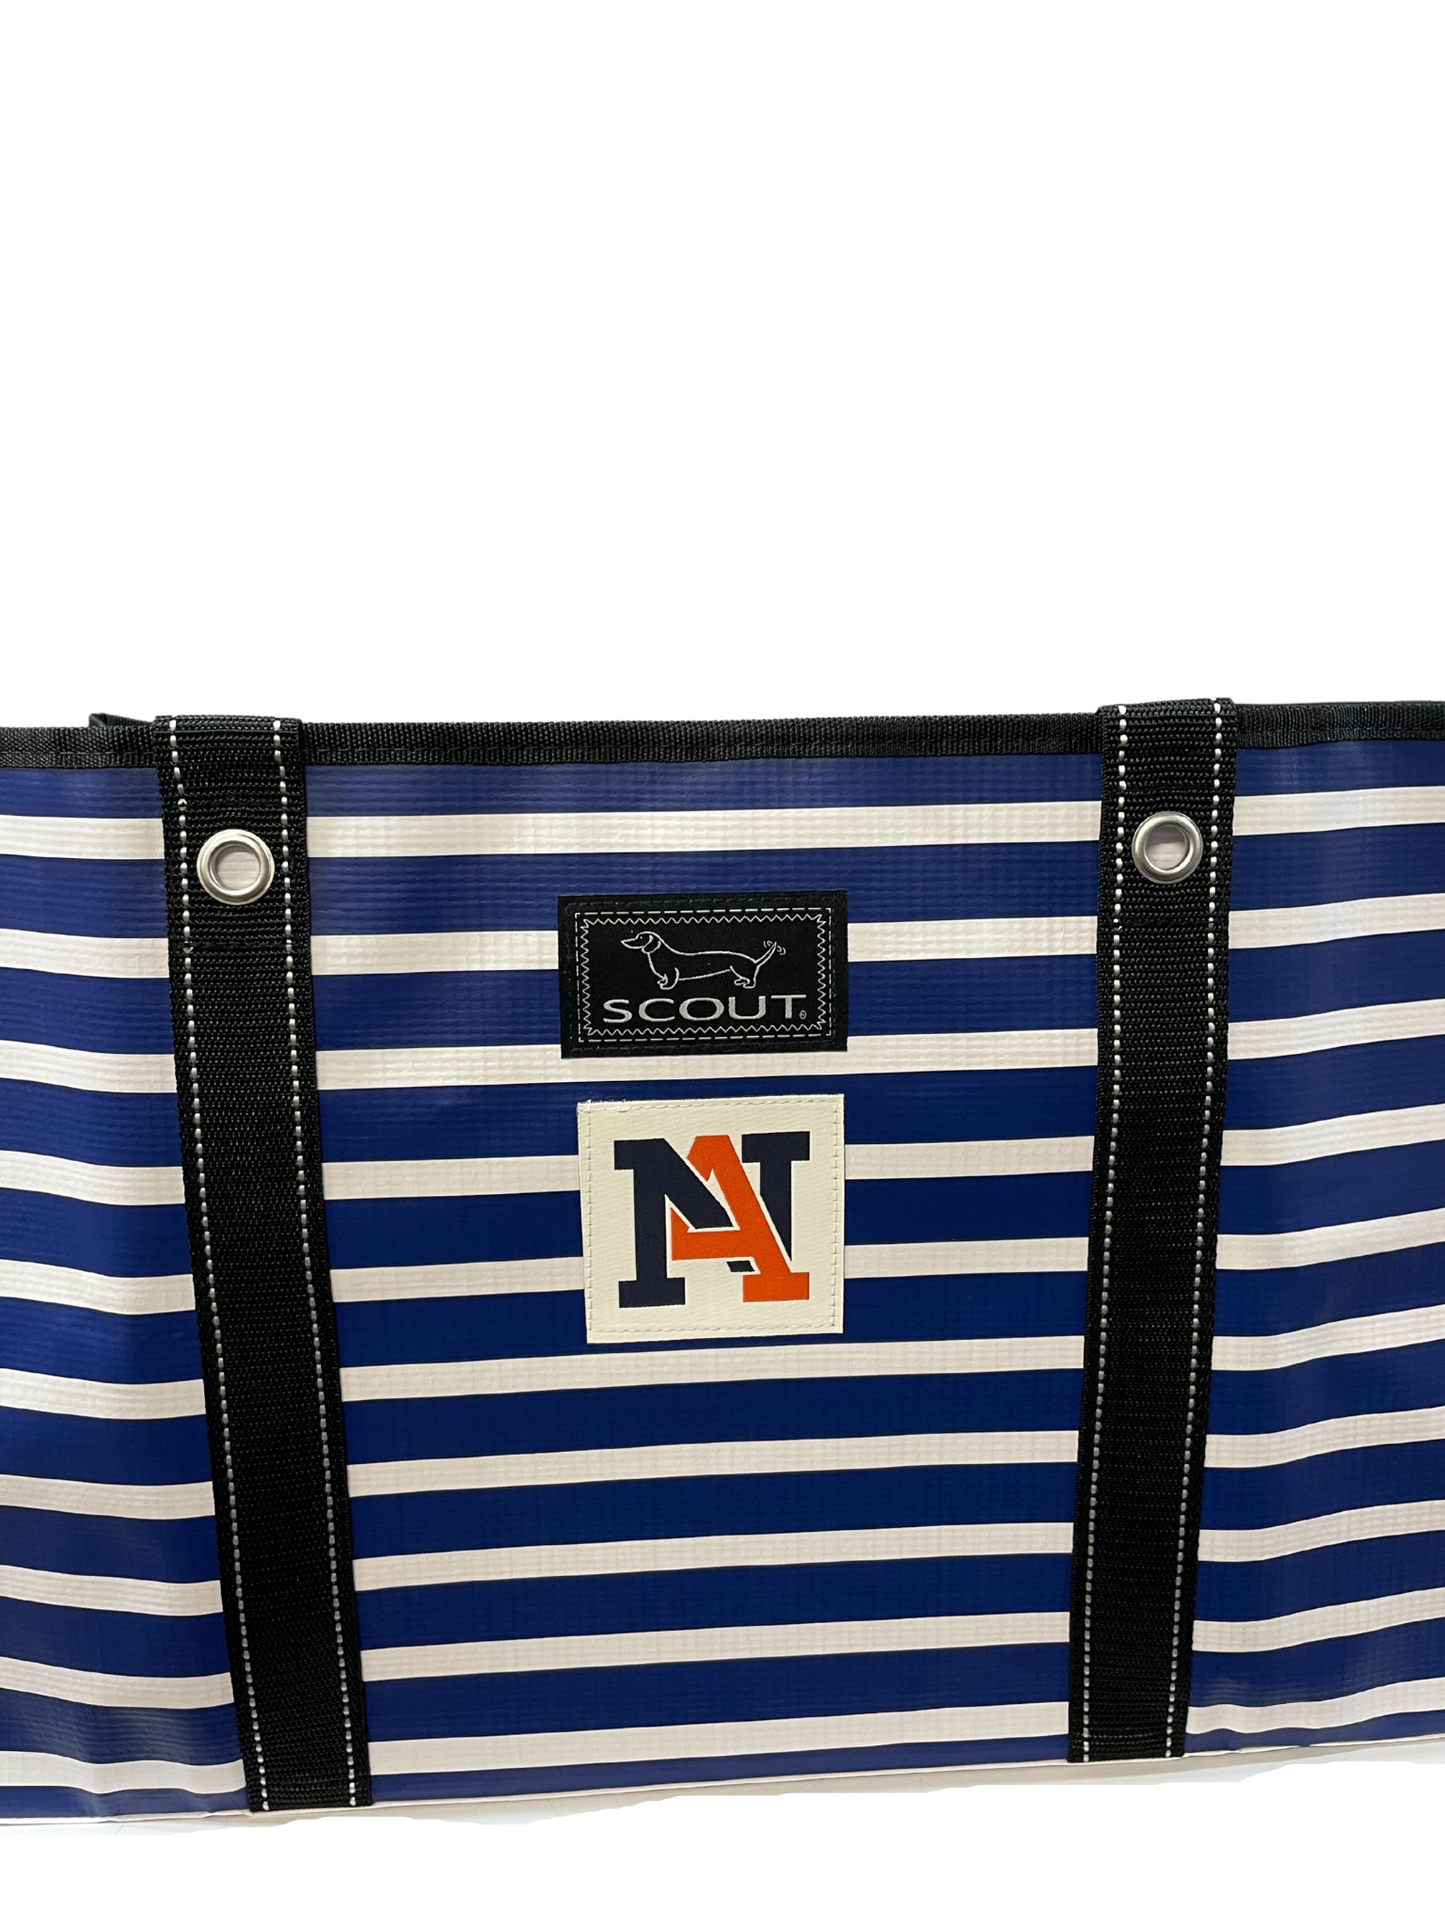 NA Deano Tote by SCOUT